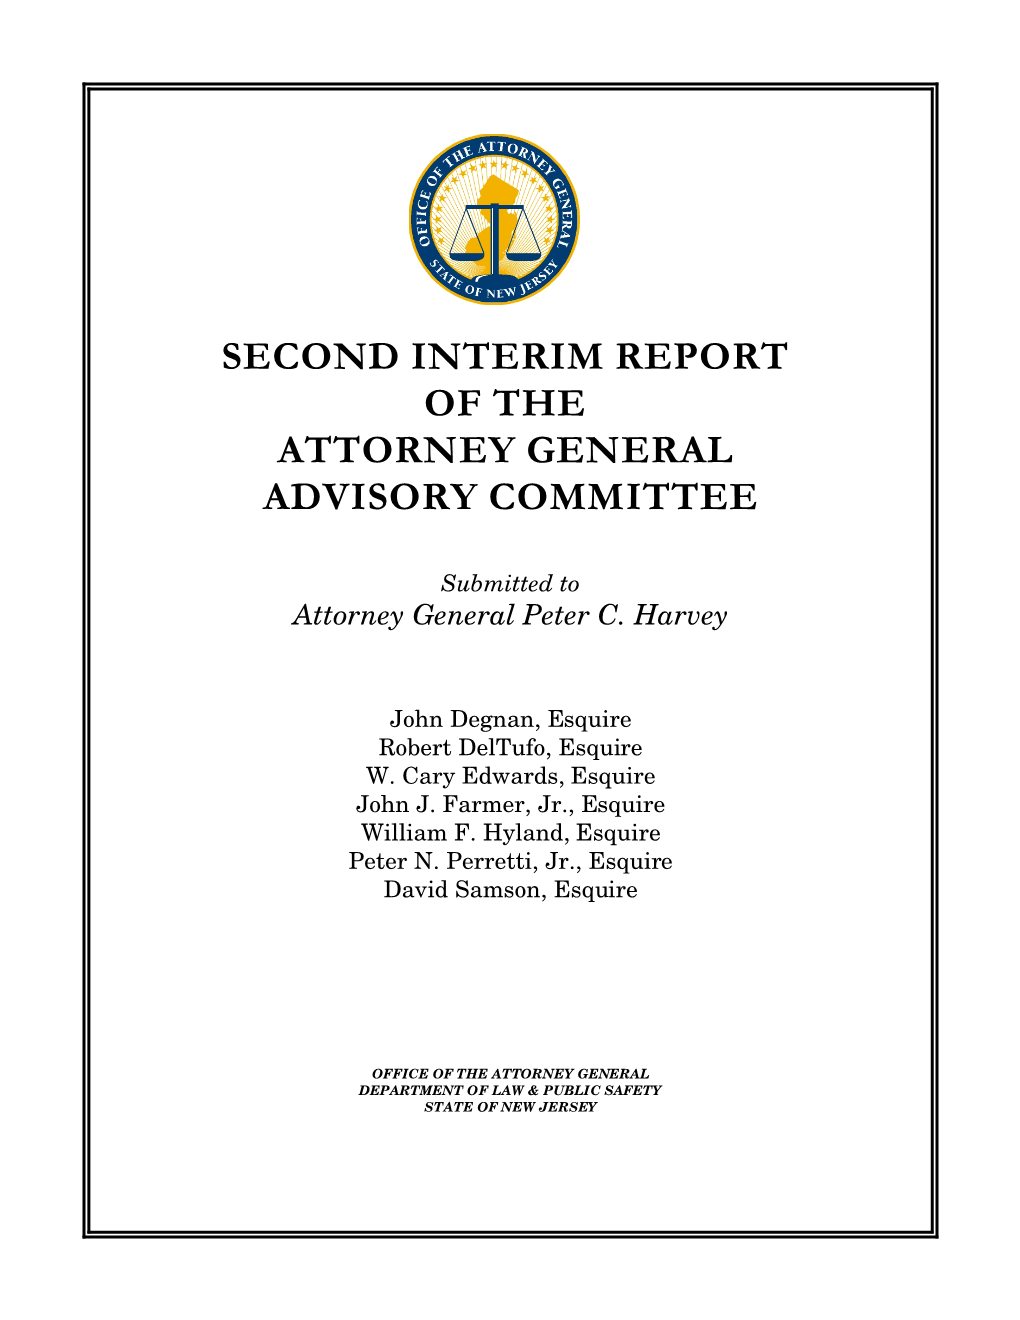 Second Interim Report of the Attorney General Advisory Committee